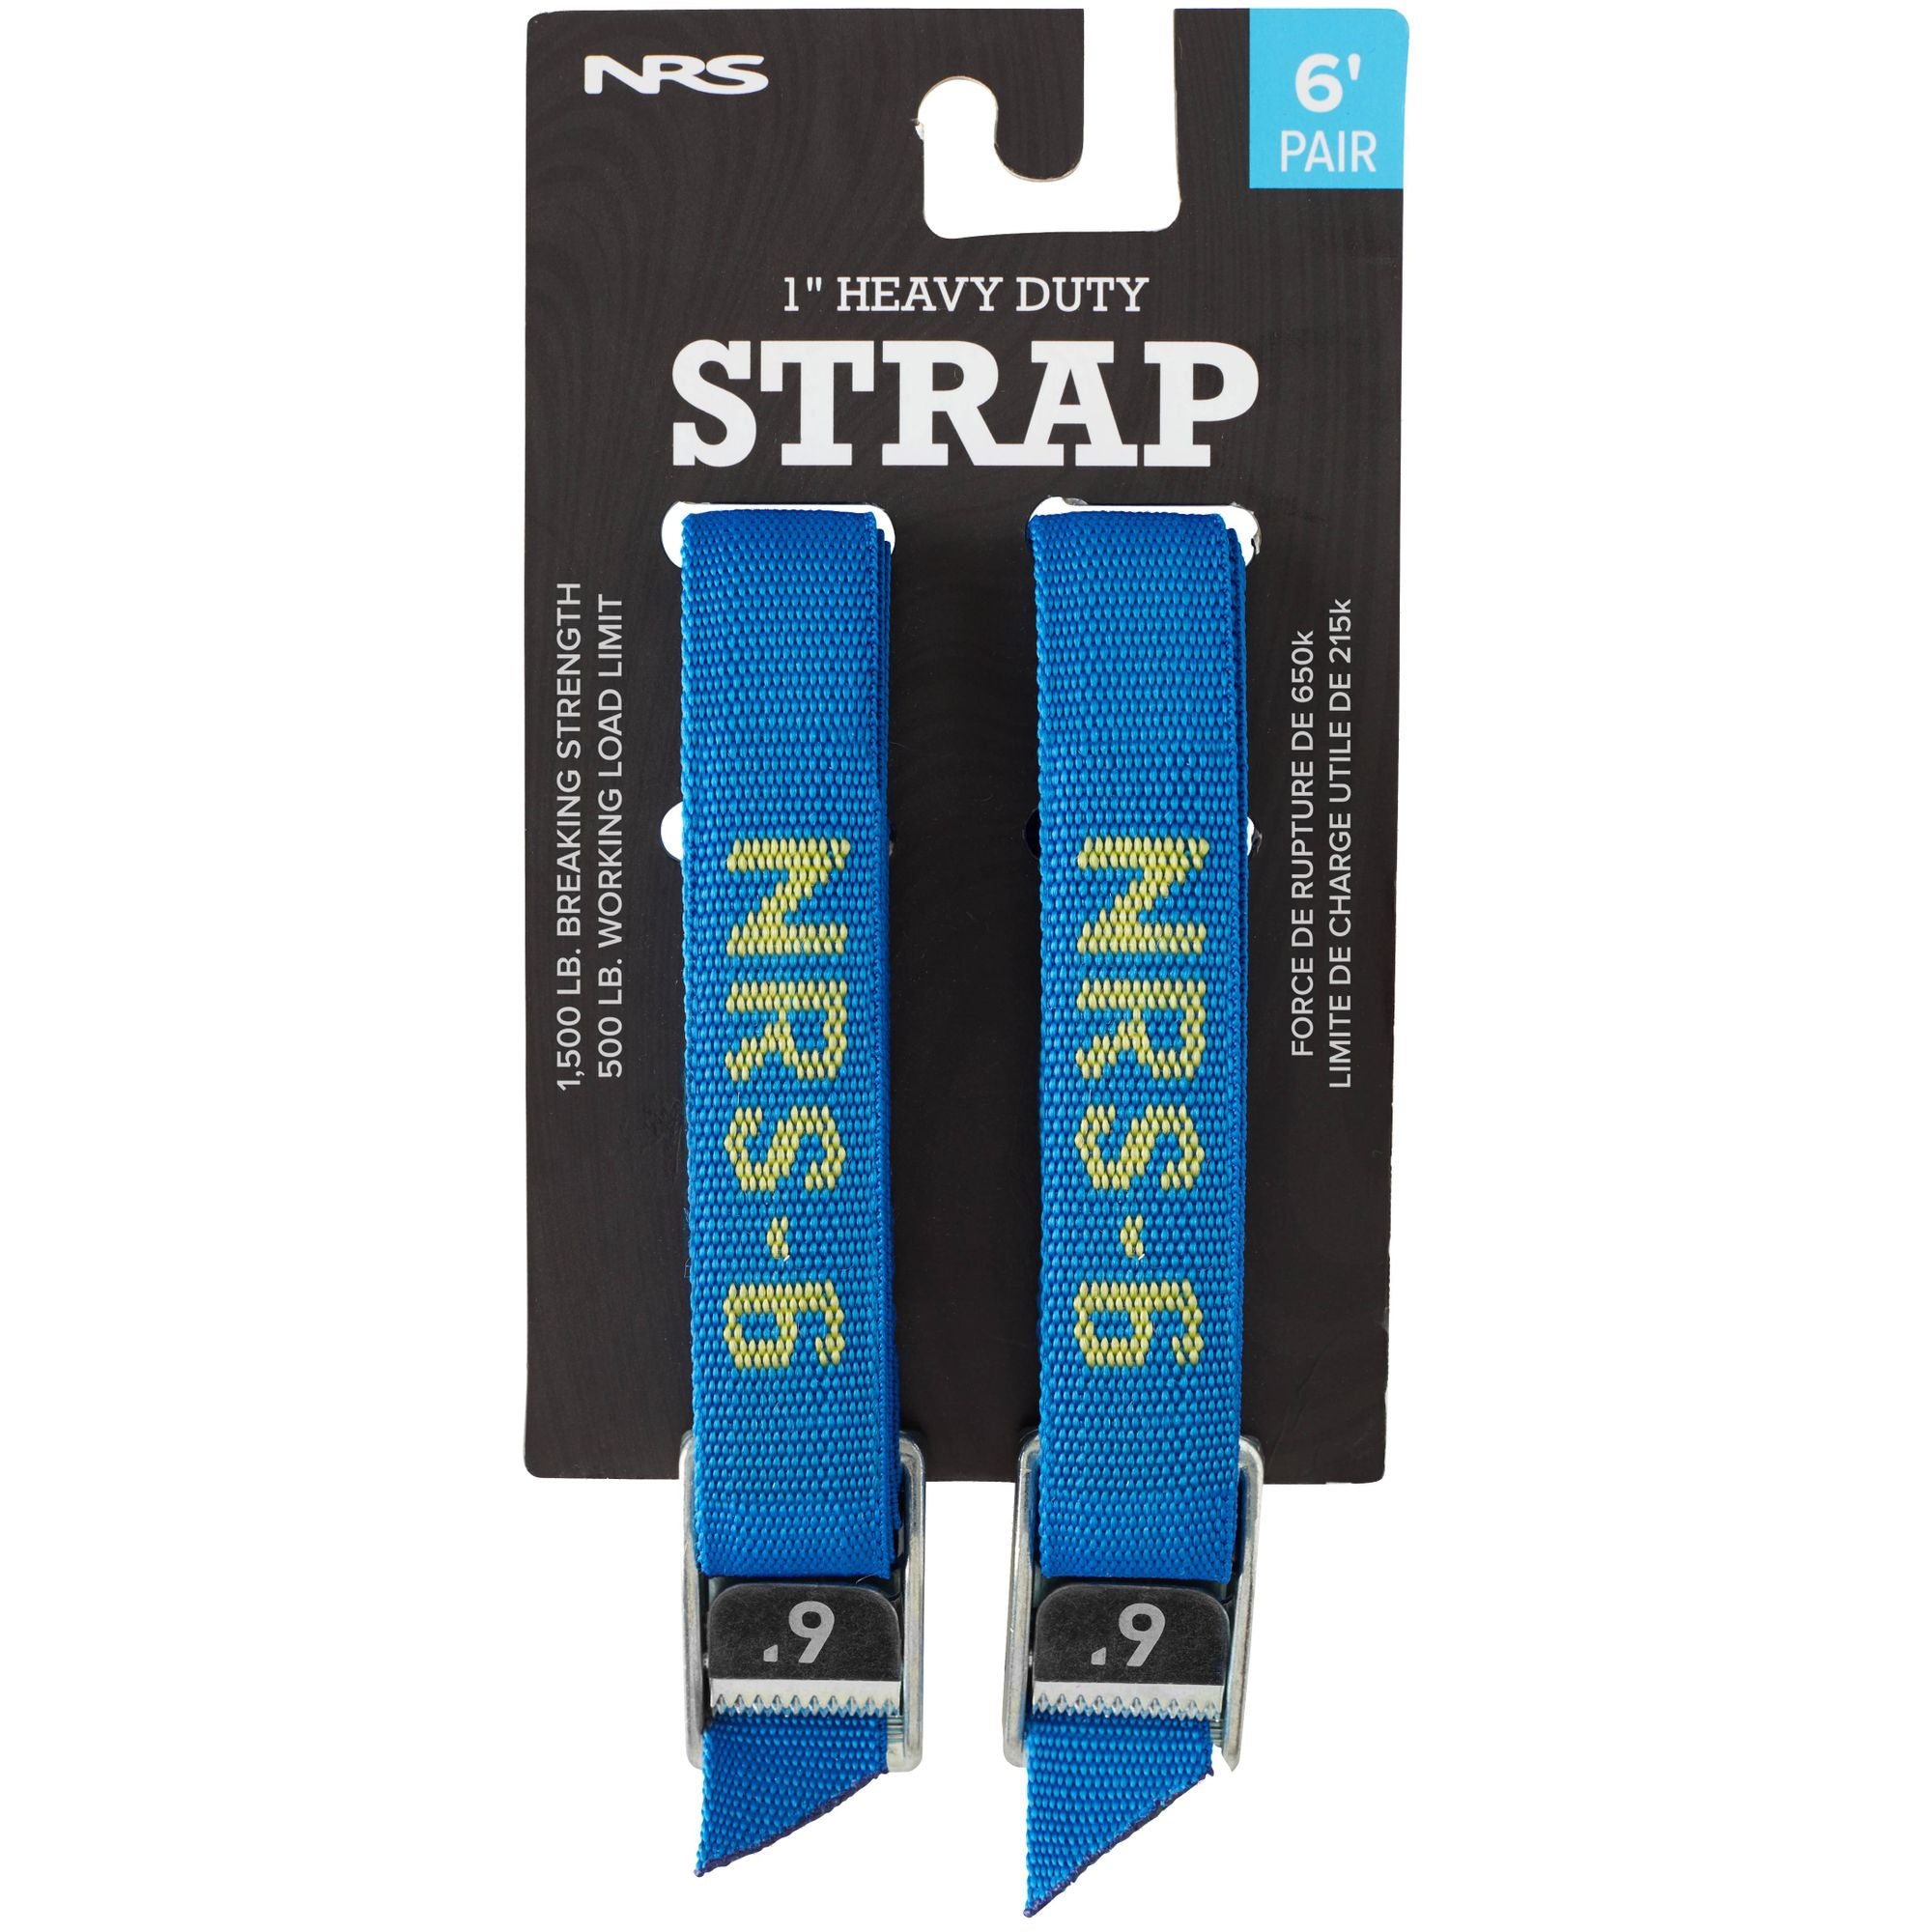 NRS 1 HD Tie-Down Straps - Iconic Blue - 9' Pair